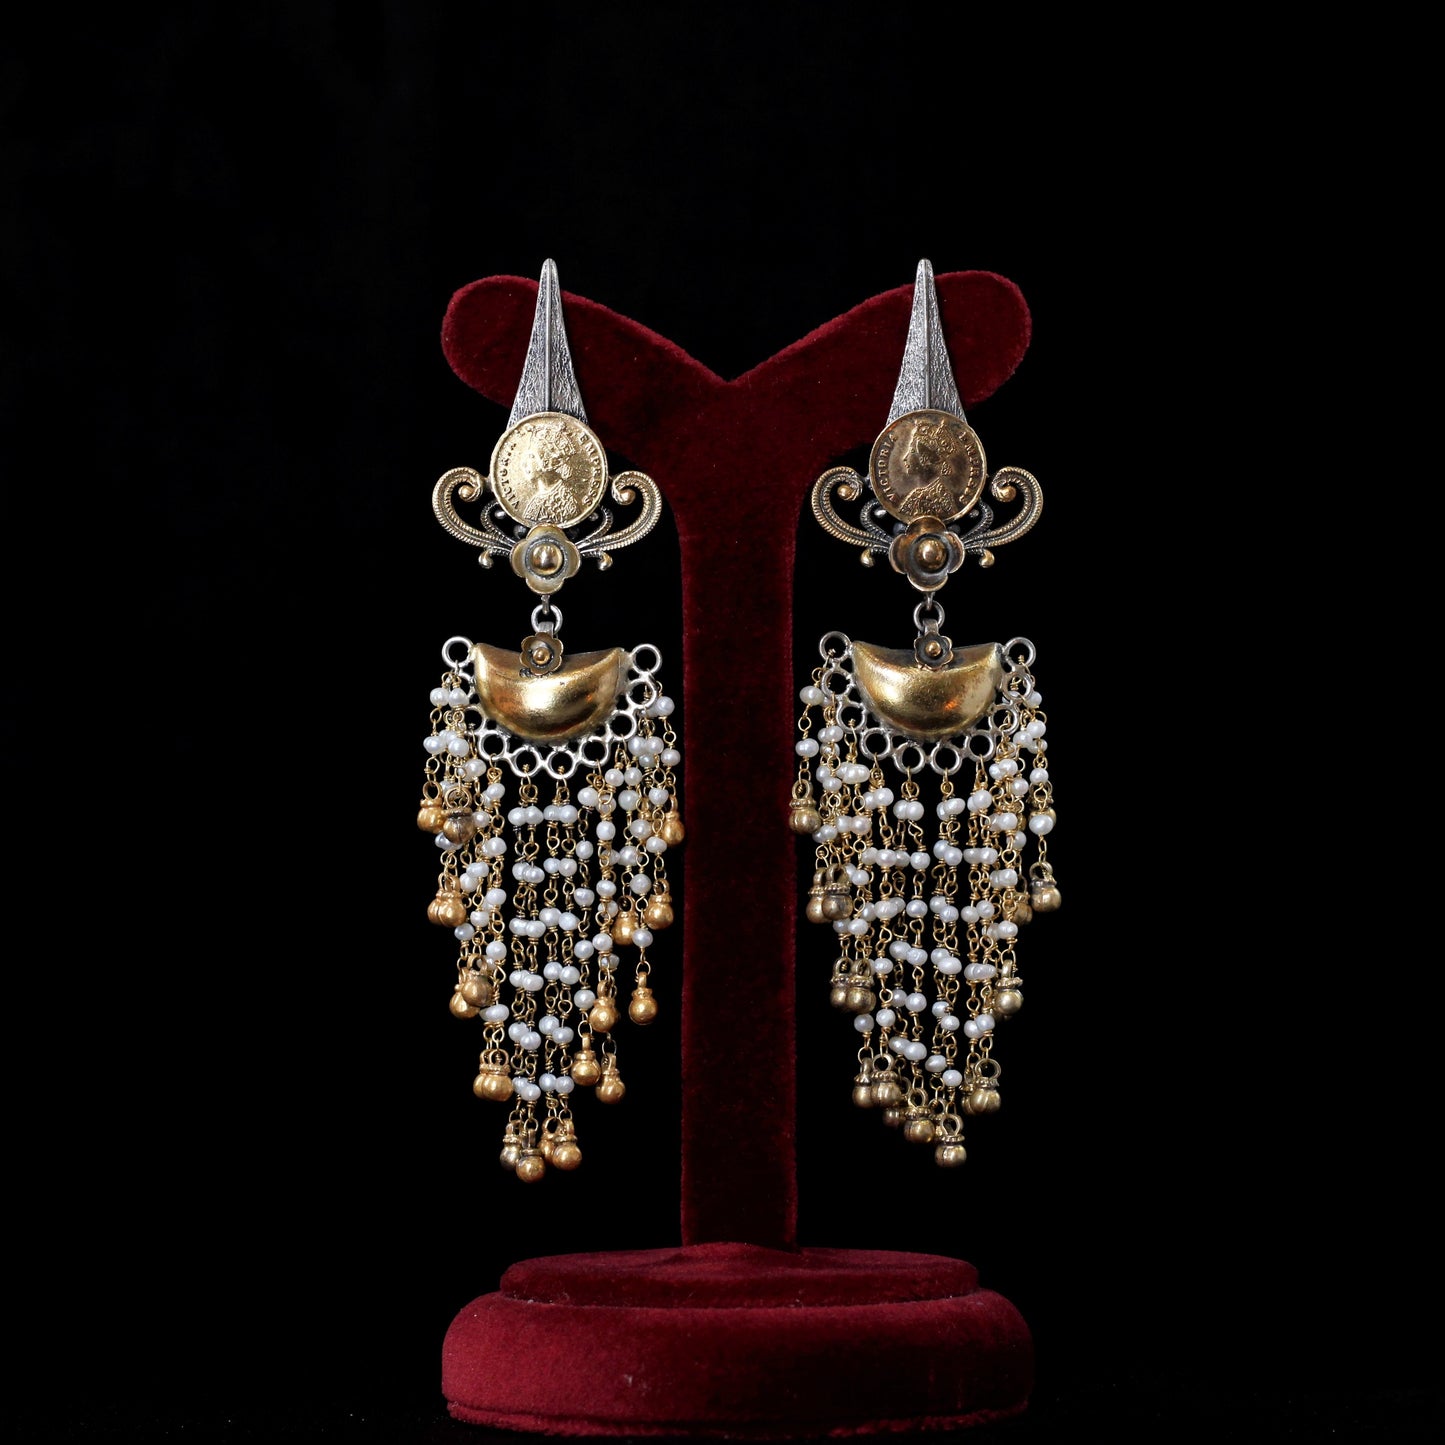 TWO-toned EARRINGS:- 92.5 STERLING SILVER WITH SILVER BEADS & FRESH WATER PEARLS.